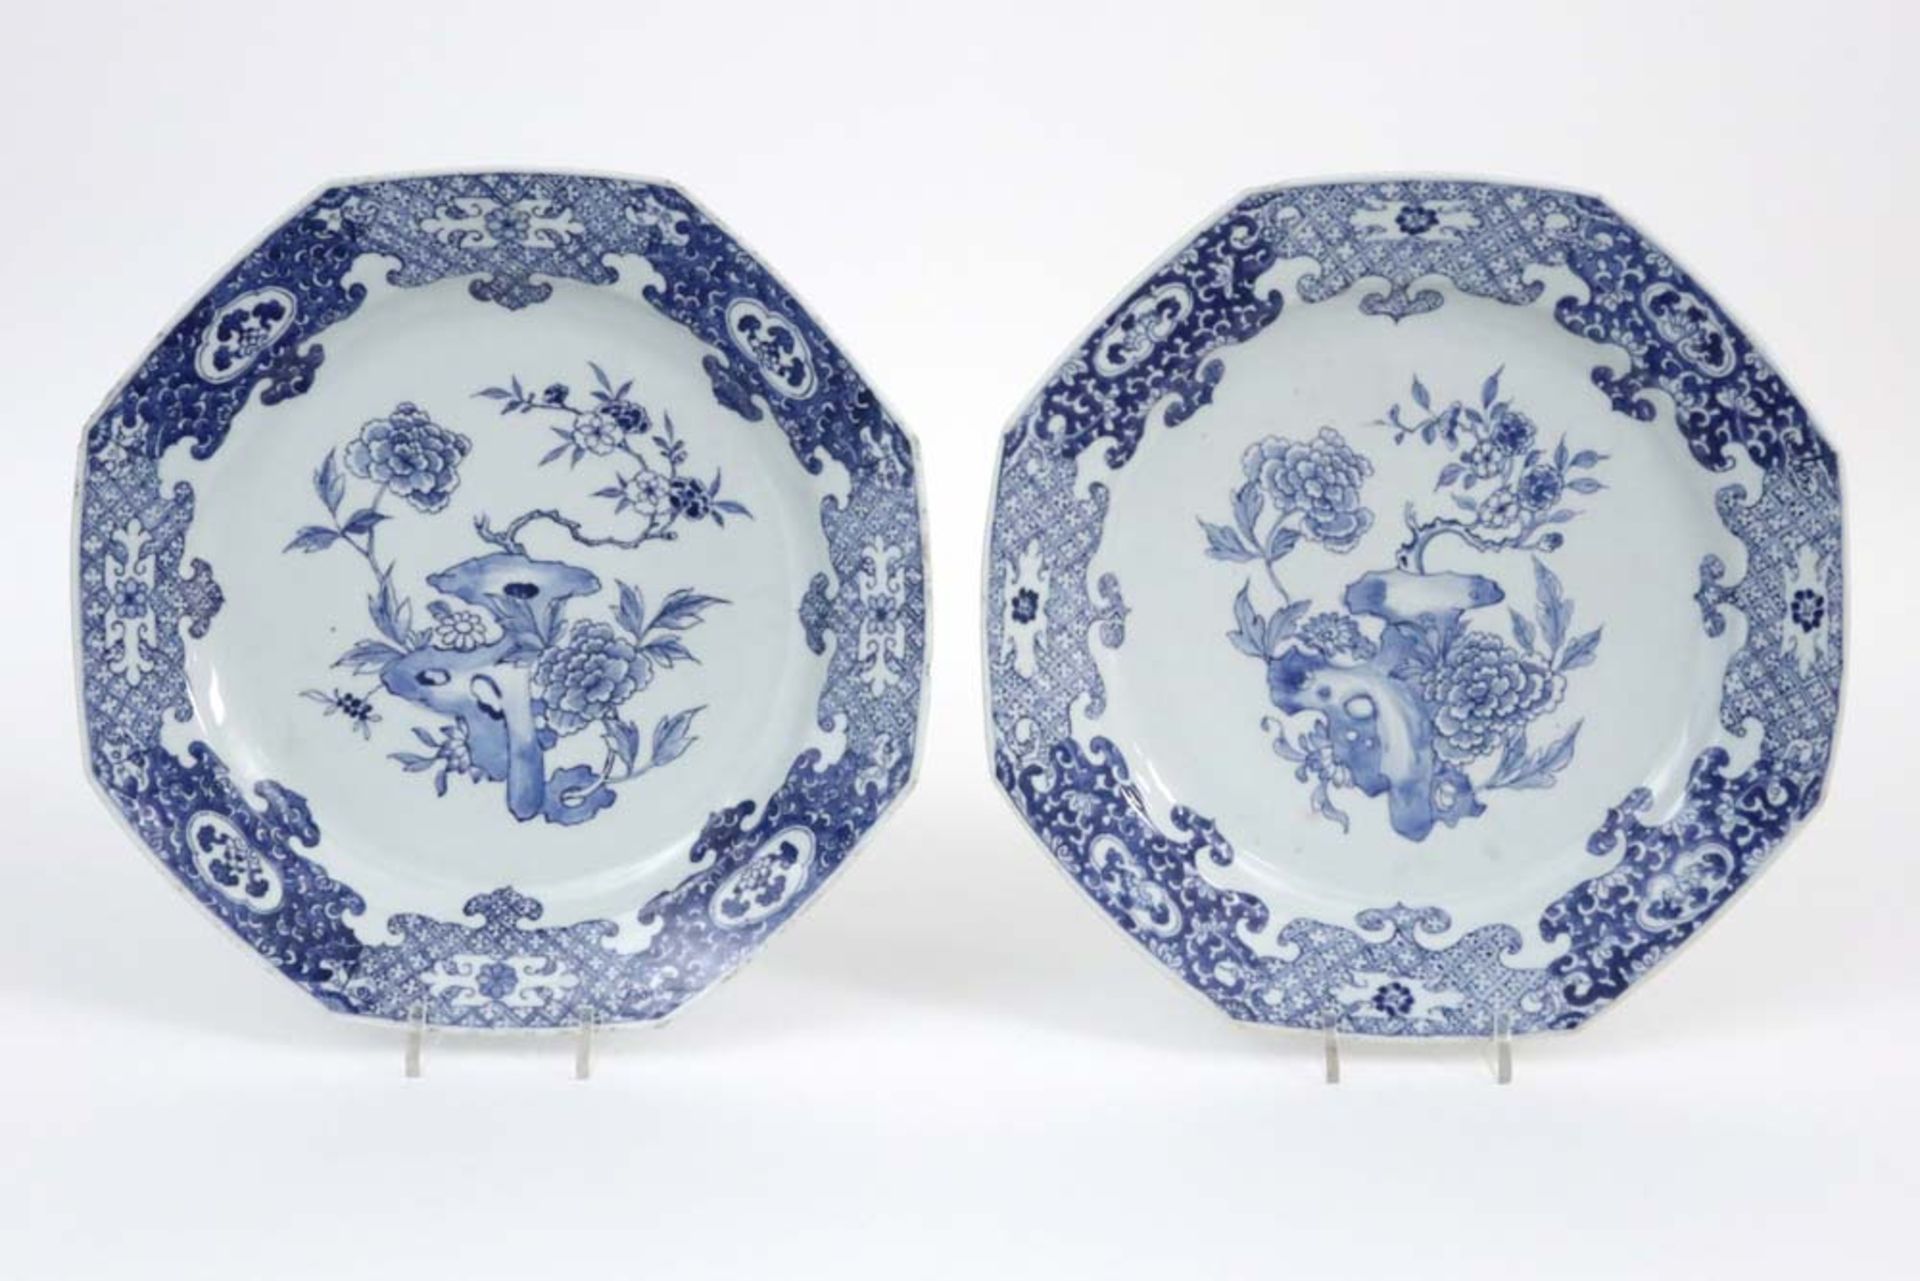 pair of 18th Cent. Chinese dishes in porcelain with a blue-white flowers decor || Paar achttiende